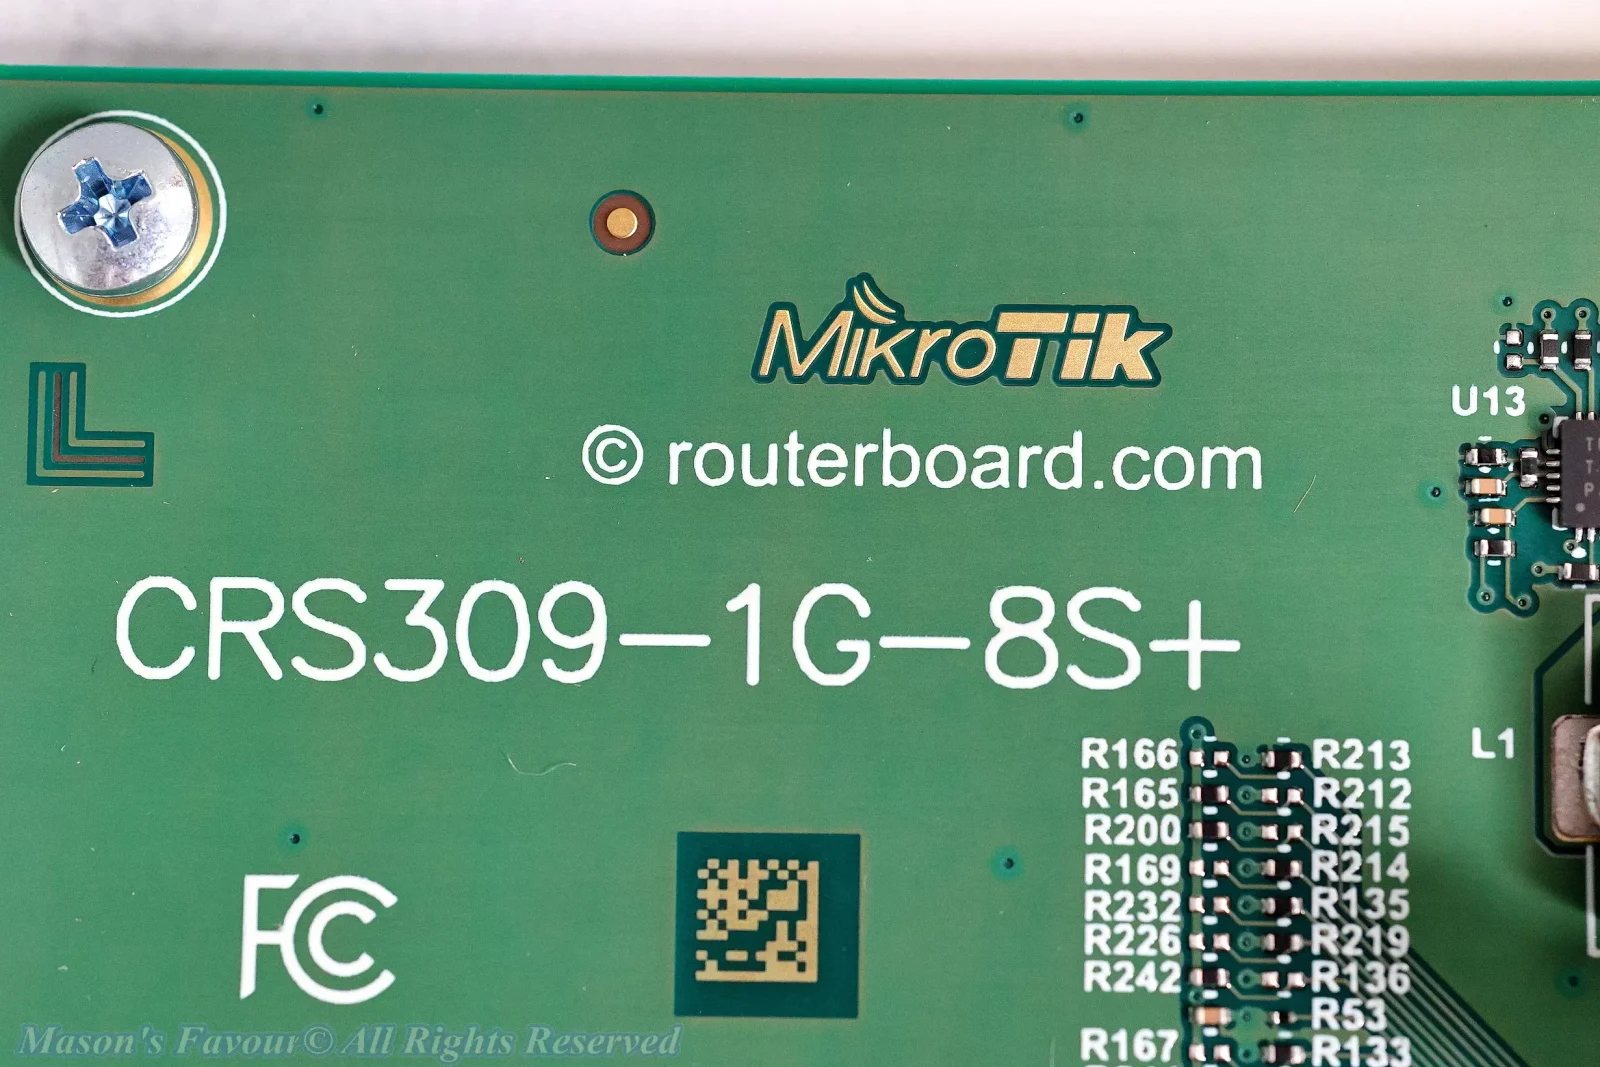 MikroTik CRS309-1G-8S+IN - Enlarged View, LOGO on the Circuit